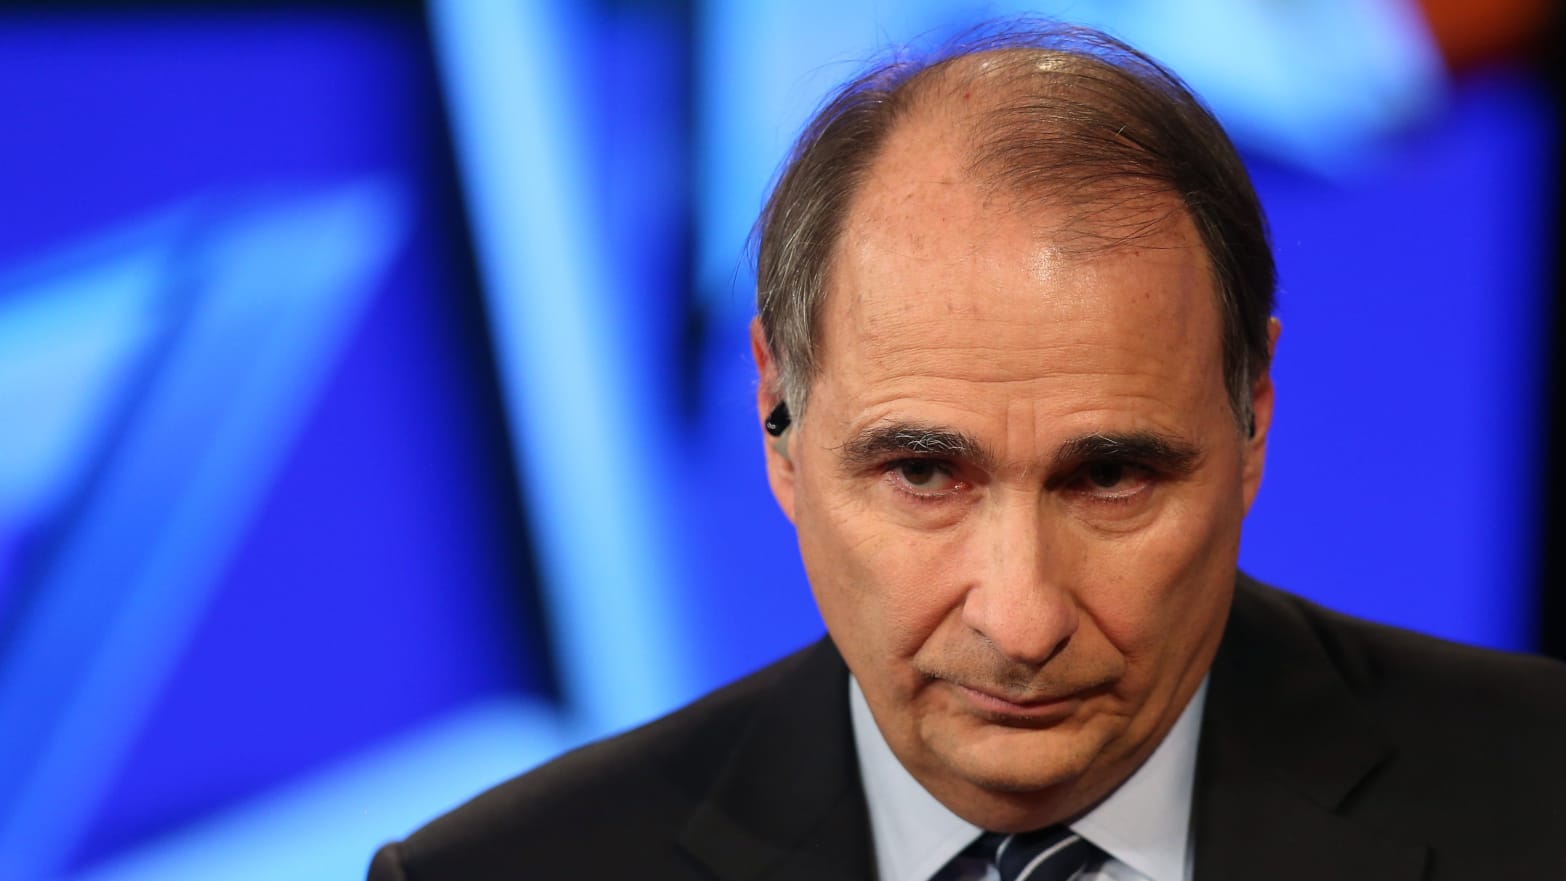 David Axelrod appears on television.